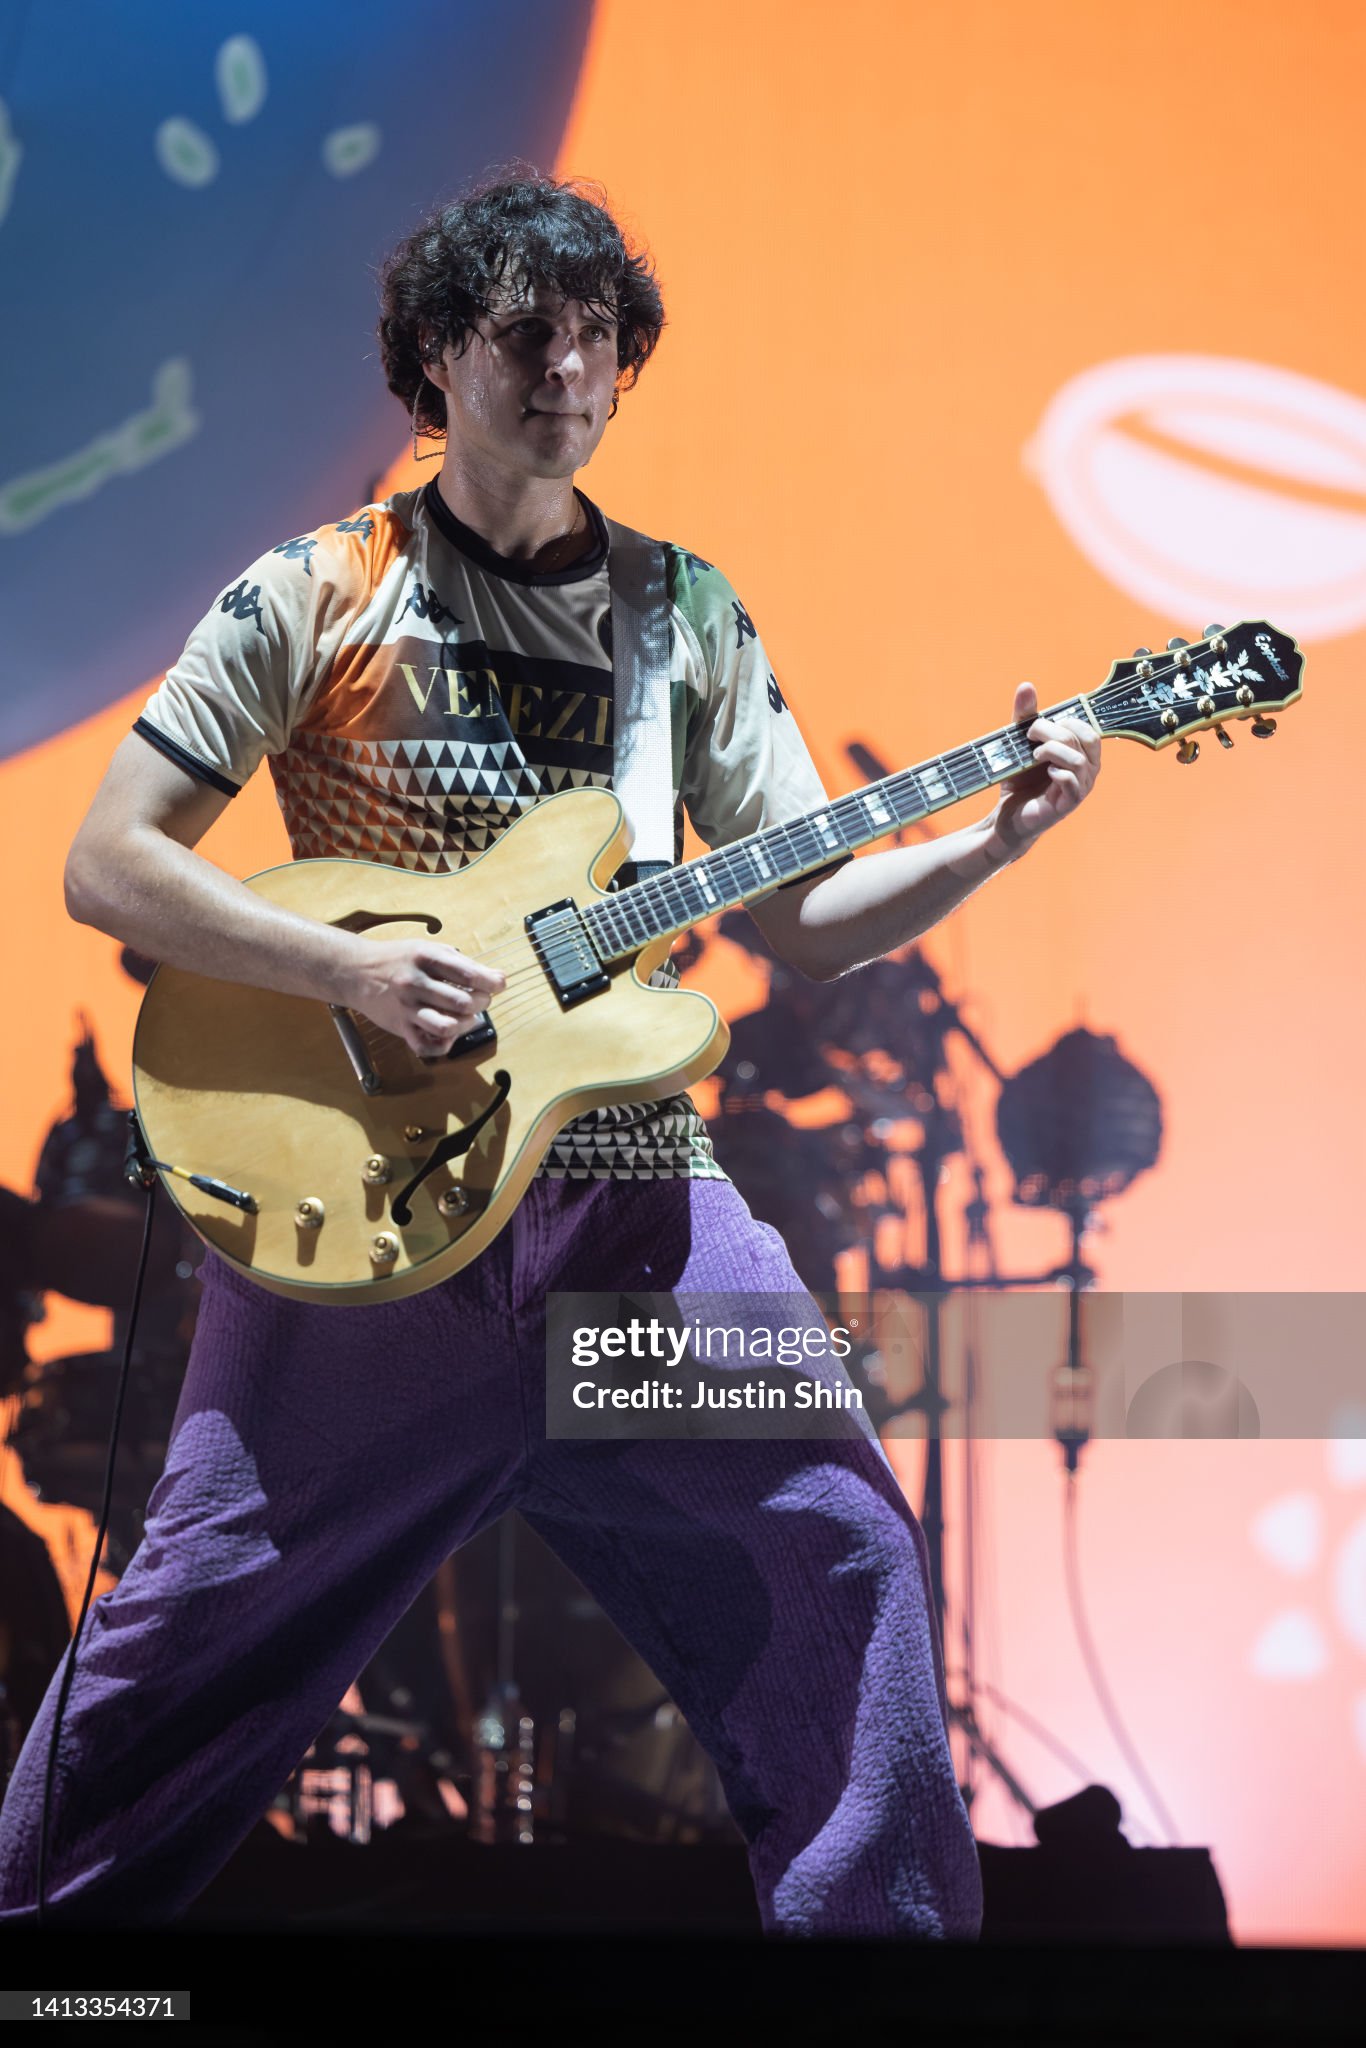 gettyimages-1413354371-2048x2048.jpg